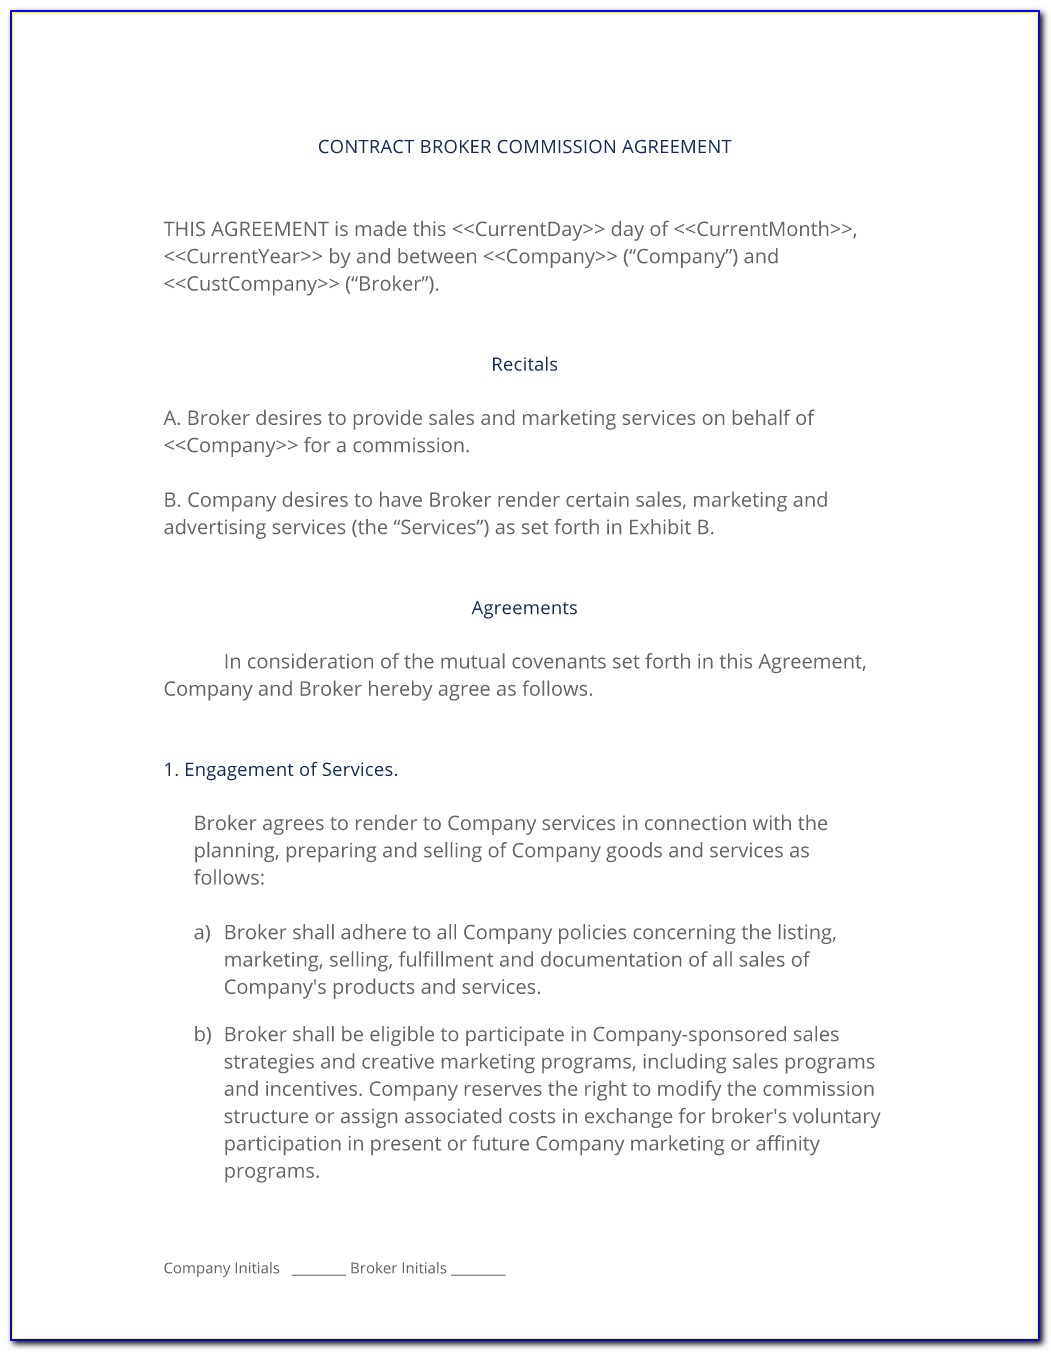 Broker Commission Agreement Template